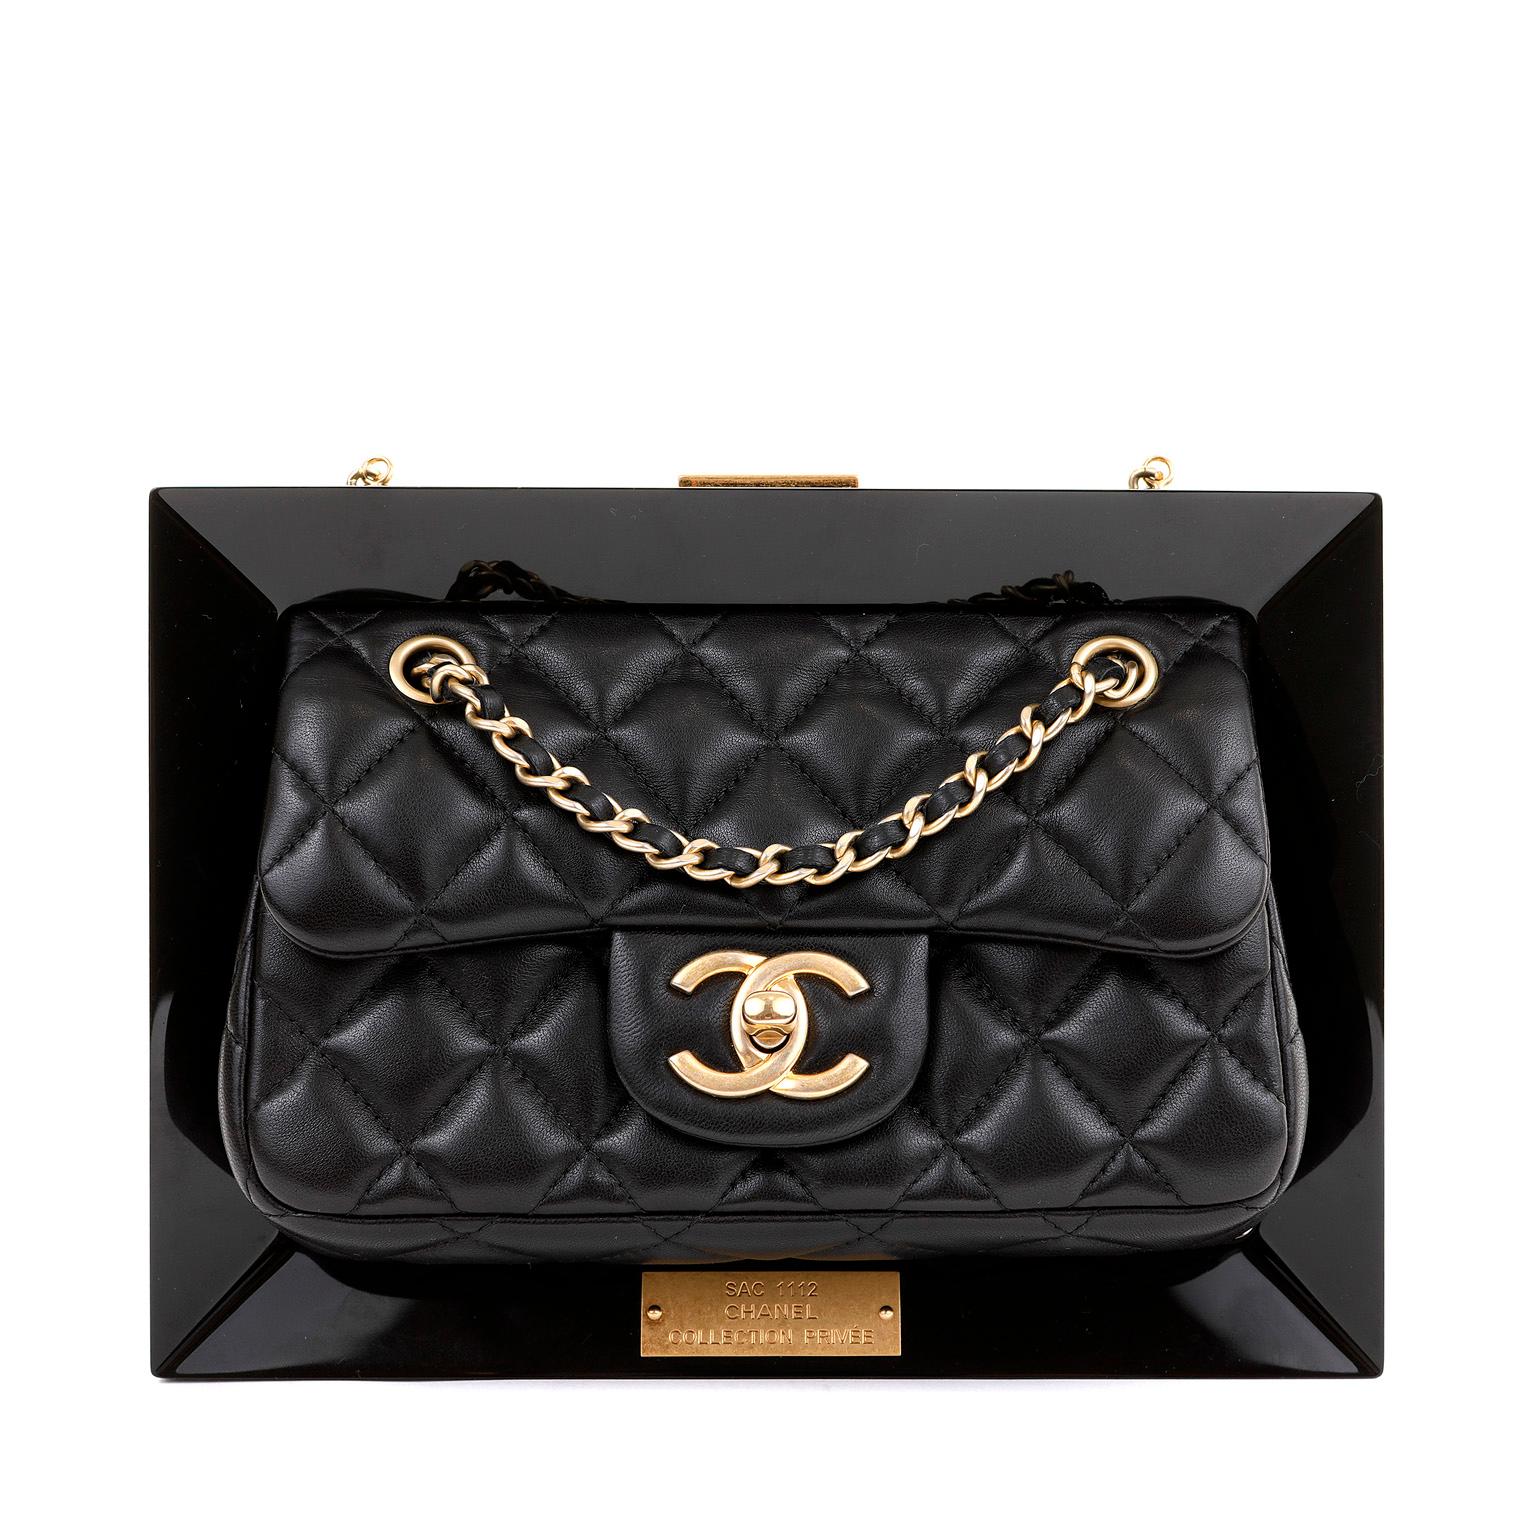 This authentic Chanel Black Privée Collection Frame Bag is in pristine condition.  Considered an extremely rare Runway collectible, this Chanel bag is completely unique.

Black quilted lambskin flap bag is attached to slim Plexiglass frame.  Gold